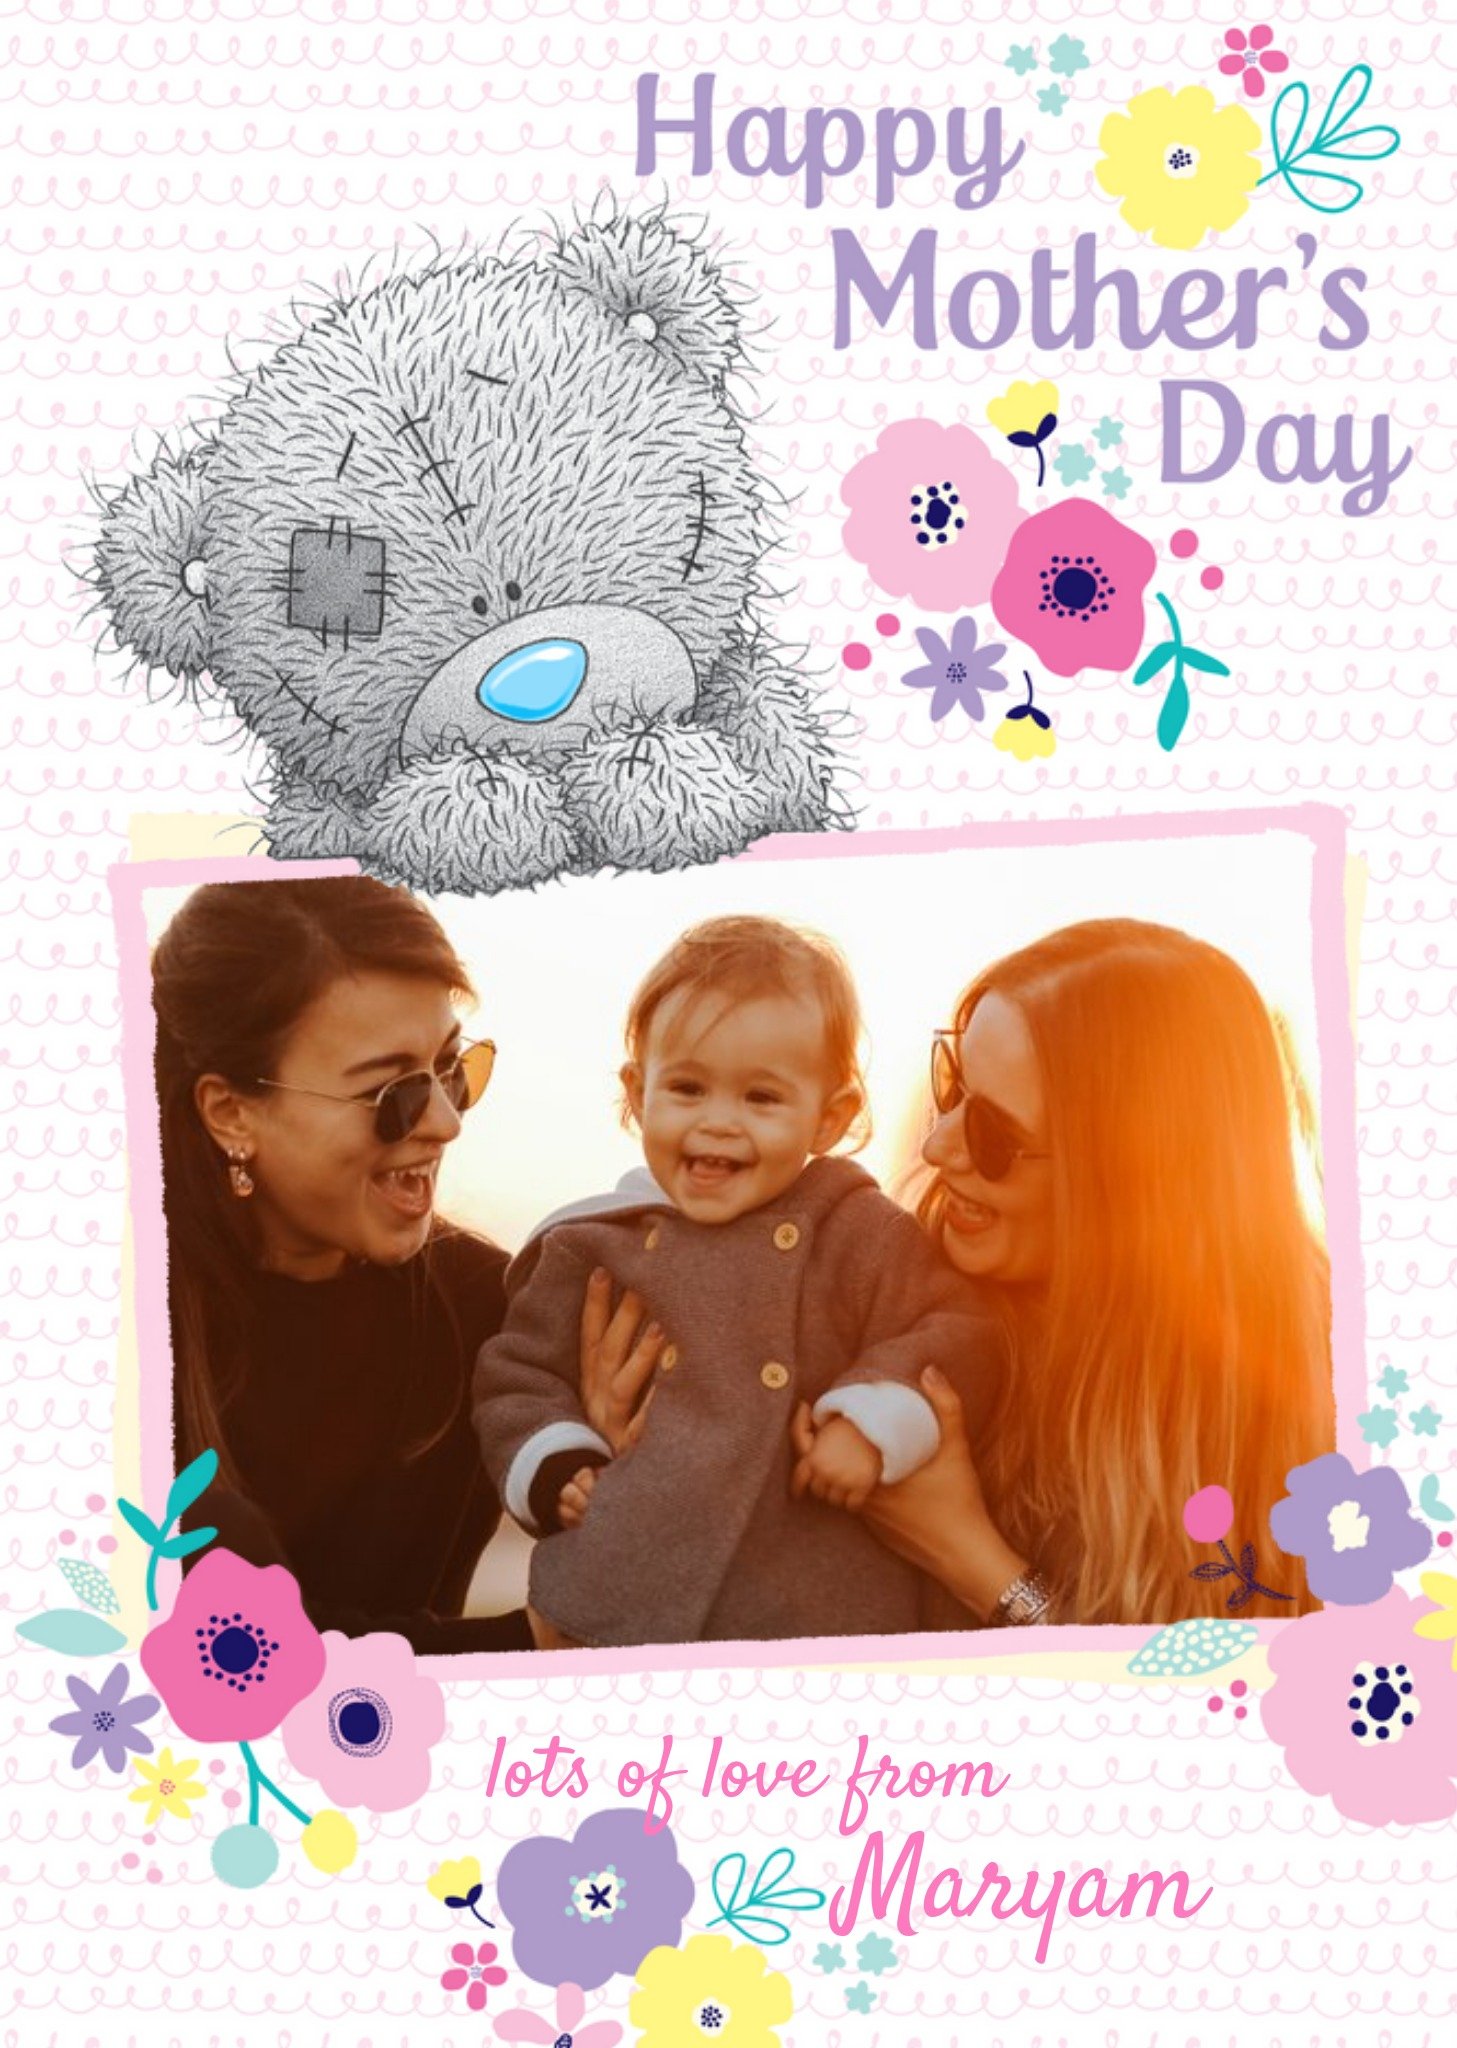 Me To You Mother's Day Card Tatty Teddy Photo Upload Card Ecard